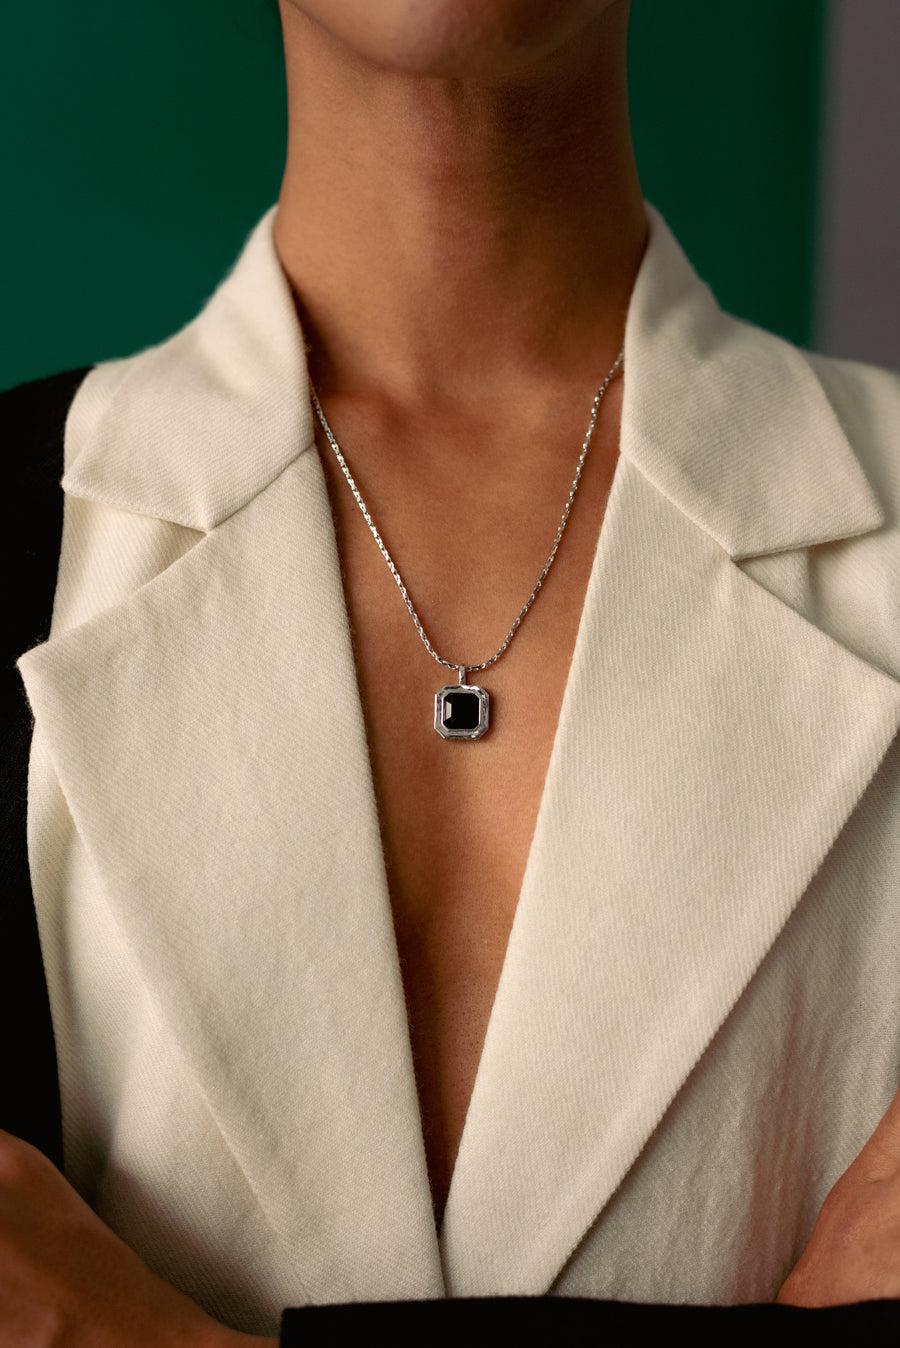 The Spinel Pendant